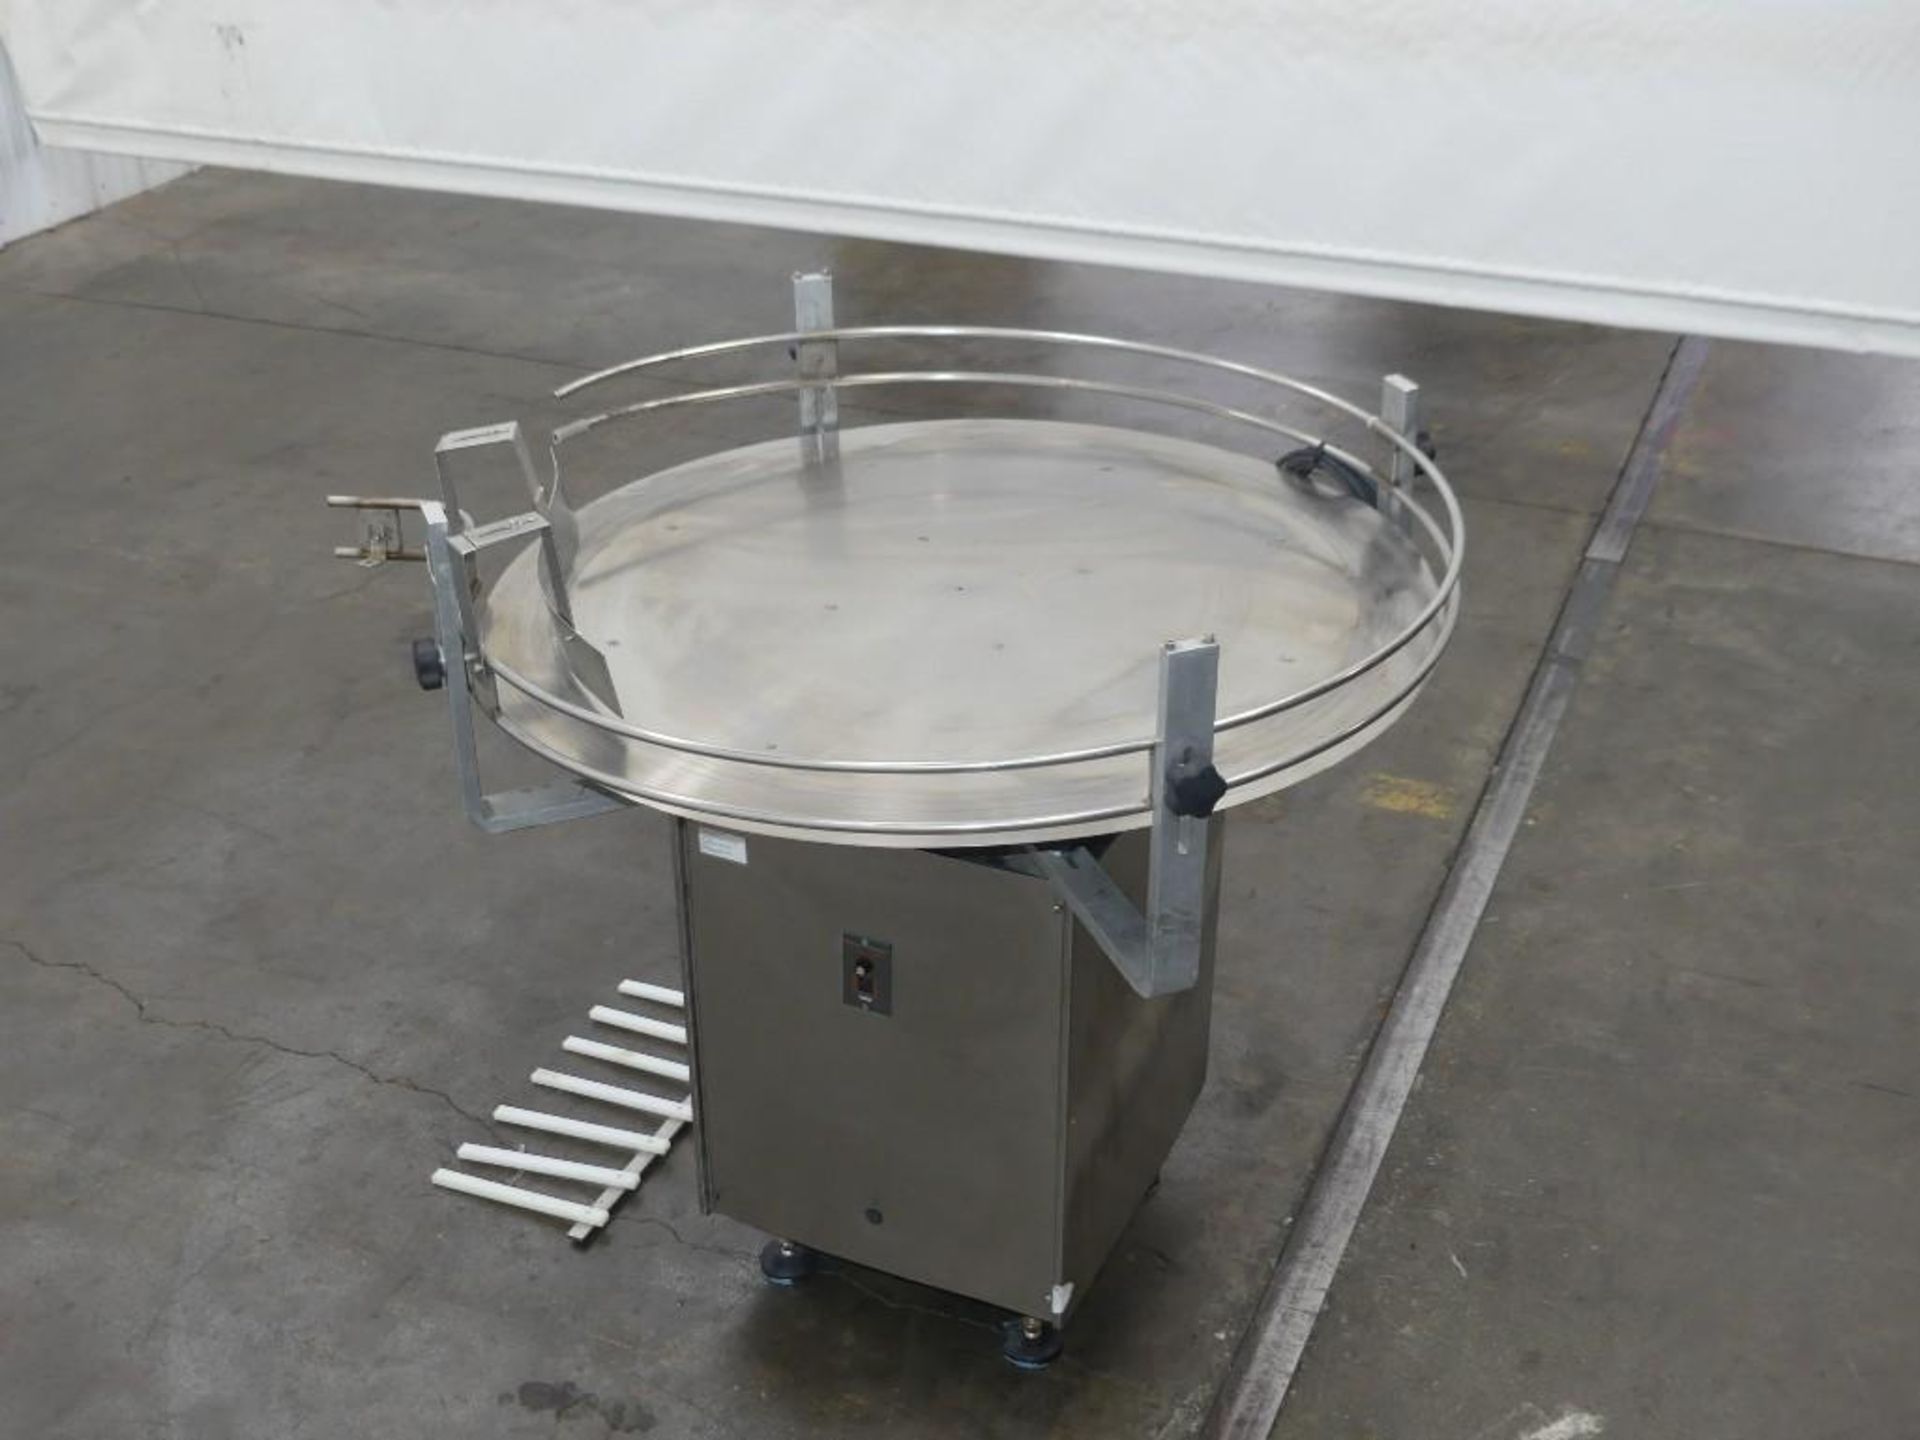 Axus 44" Stainless Steel Rotary Accumulation Table - Image 2 of 9